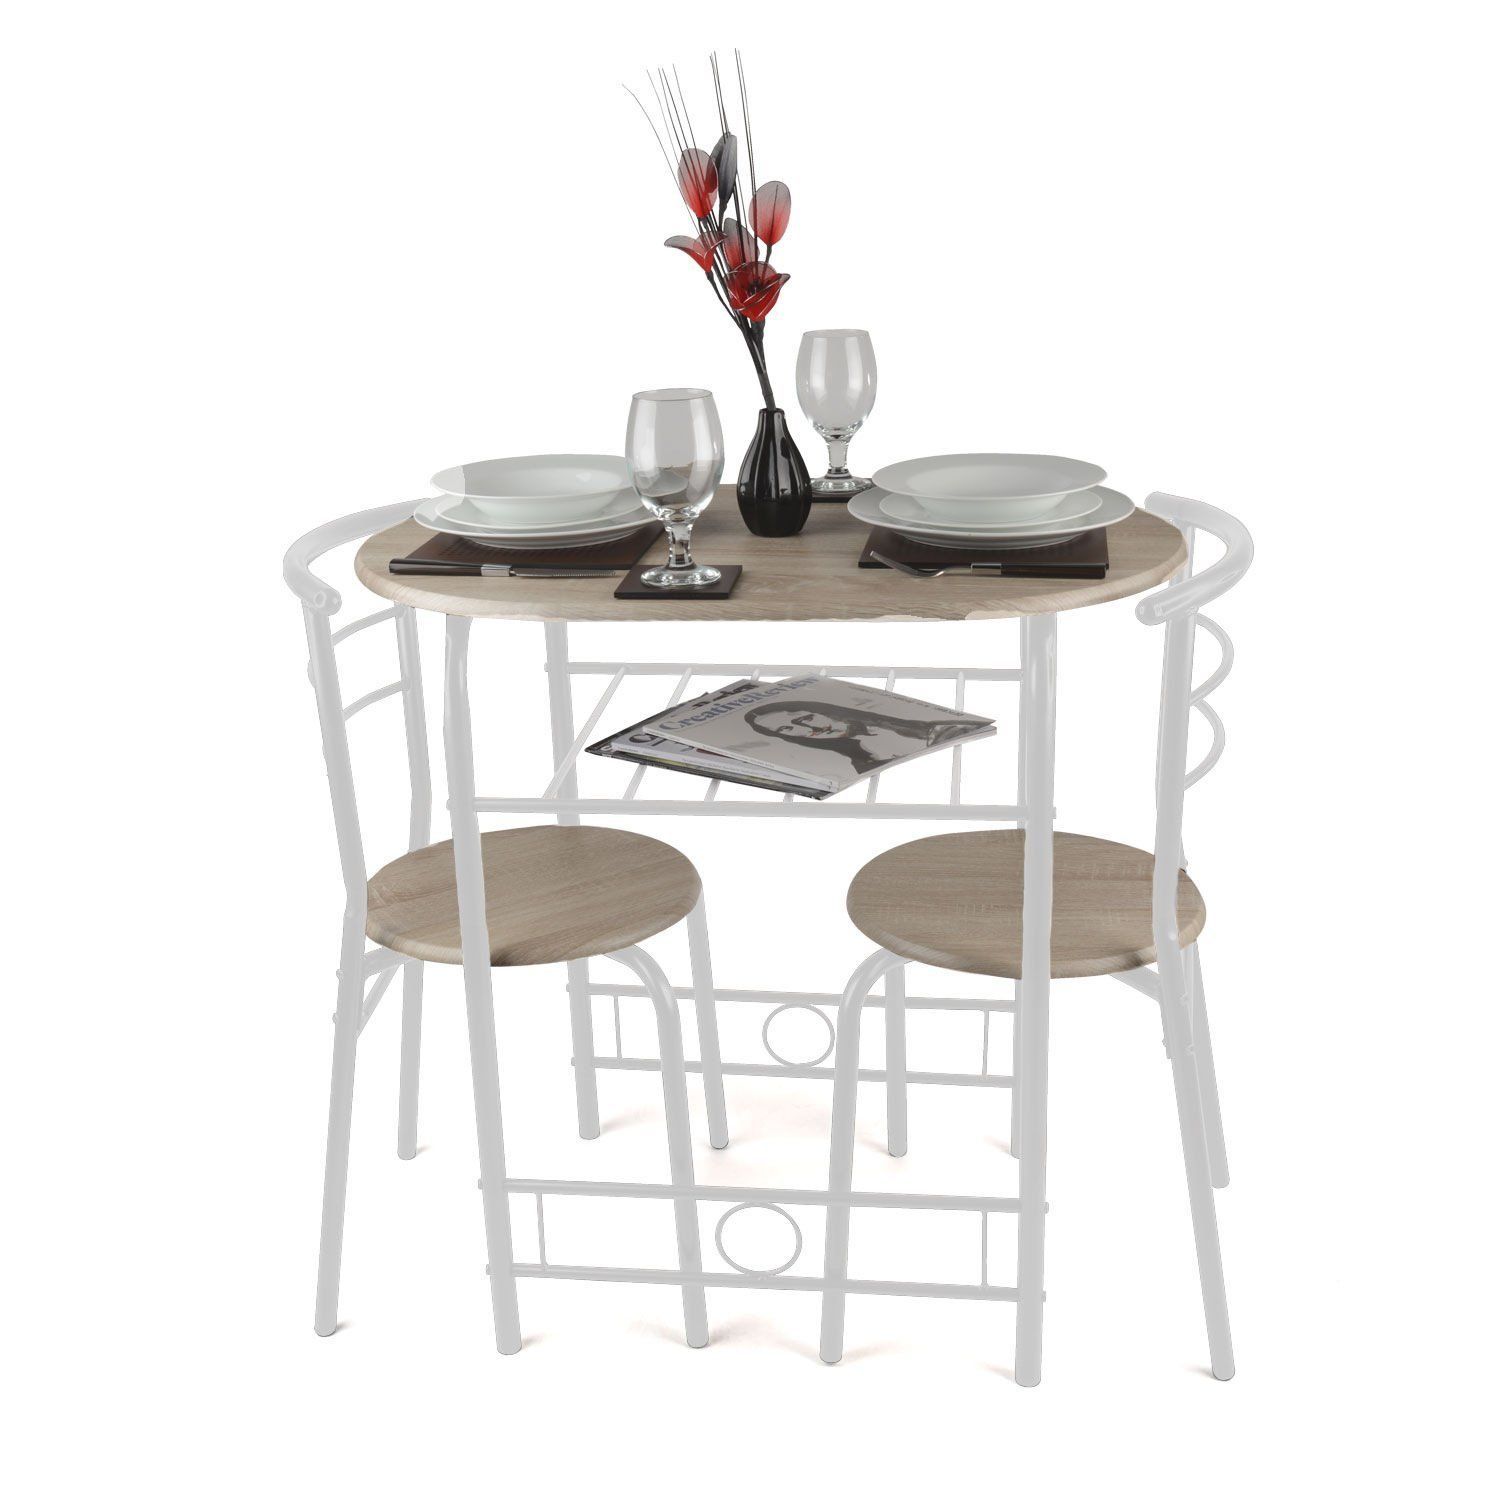 Most Popular 3 Piece Breakfast Dining Sets Pertaining To Christow 3 Piece Breakfast Dining Set White: Amazon.co (View 7 of 20)